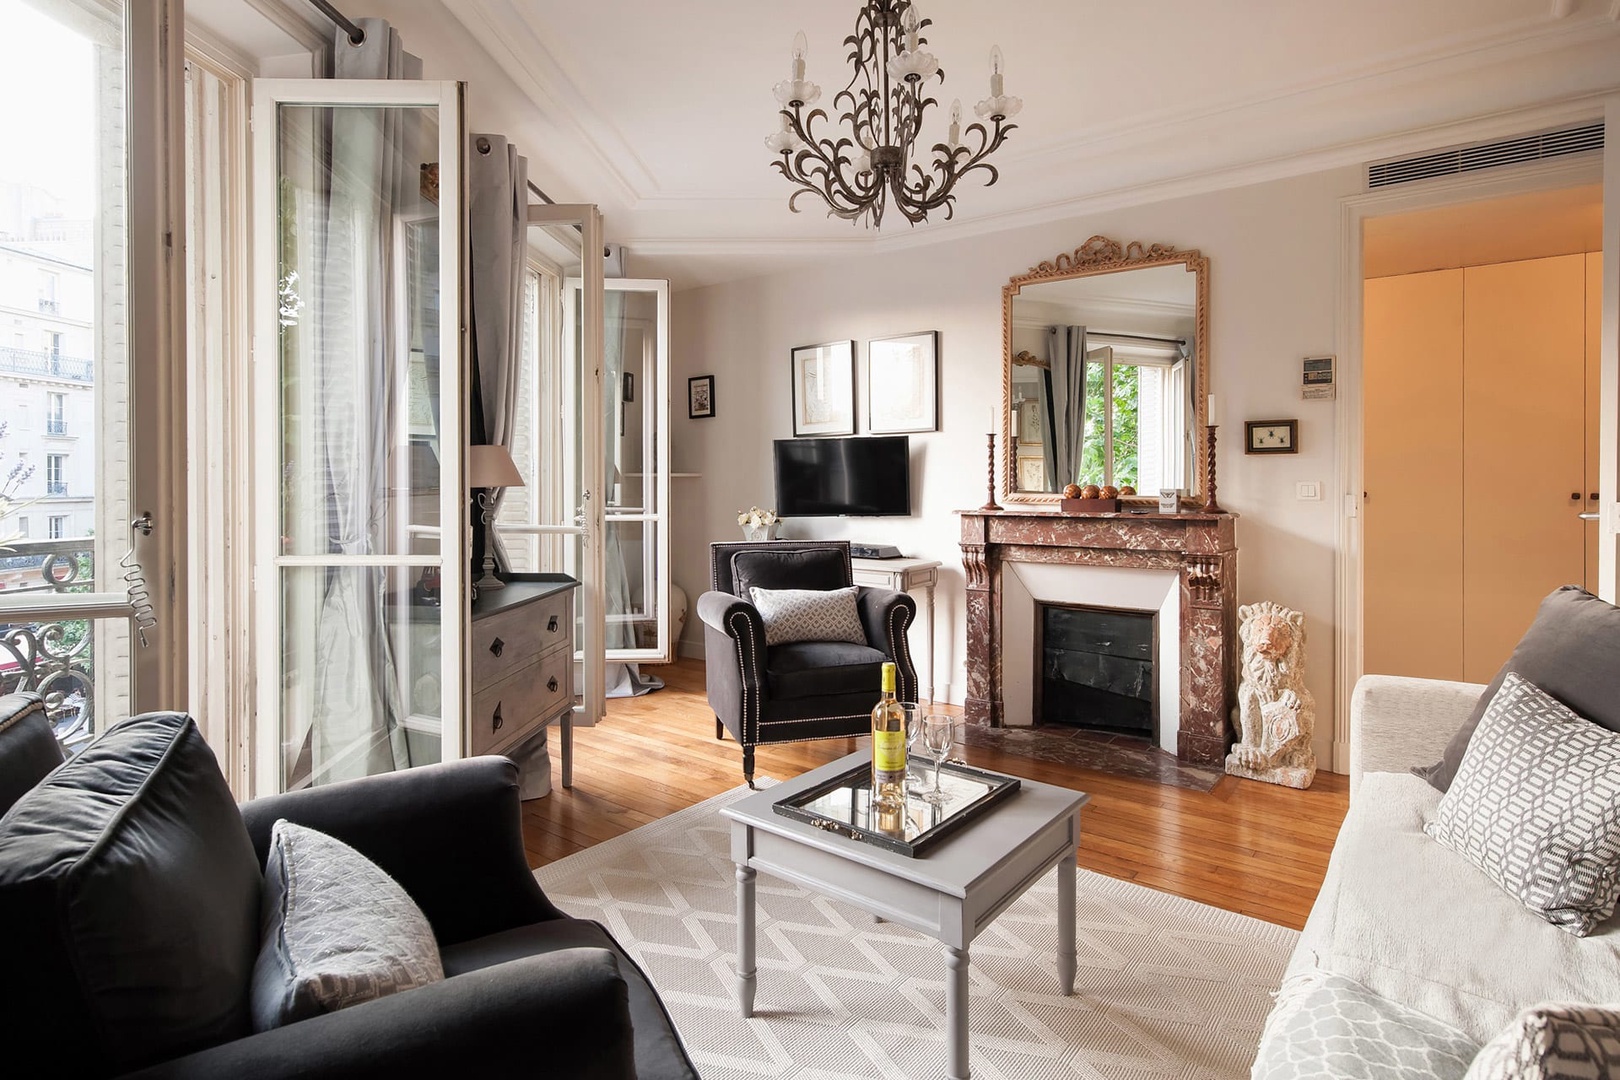 The living room is ultra-charming and truly Parisian!